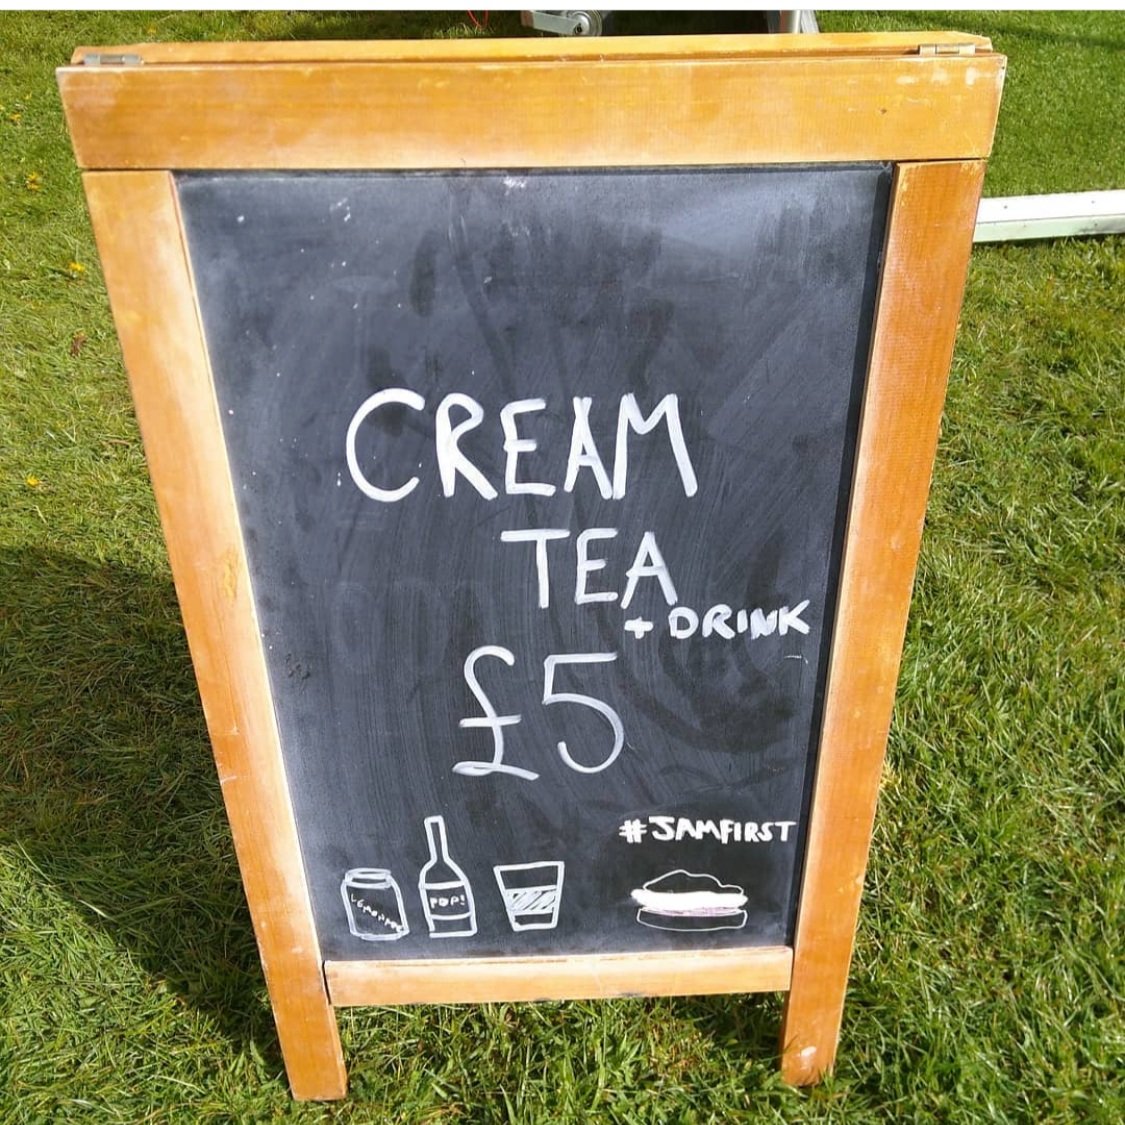   The price is right: £5 for a tea and scone  